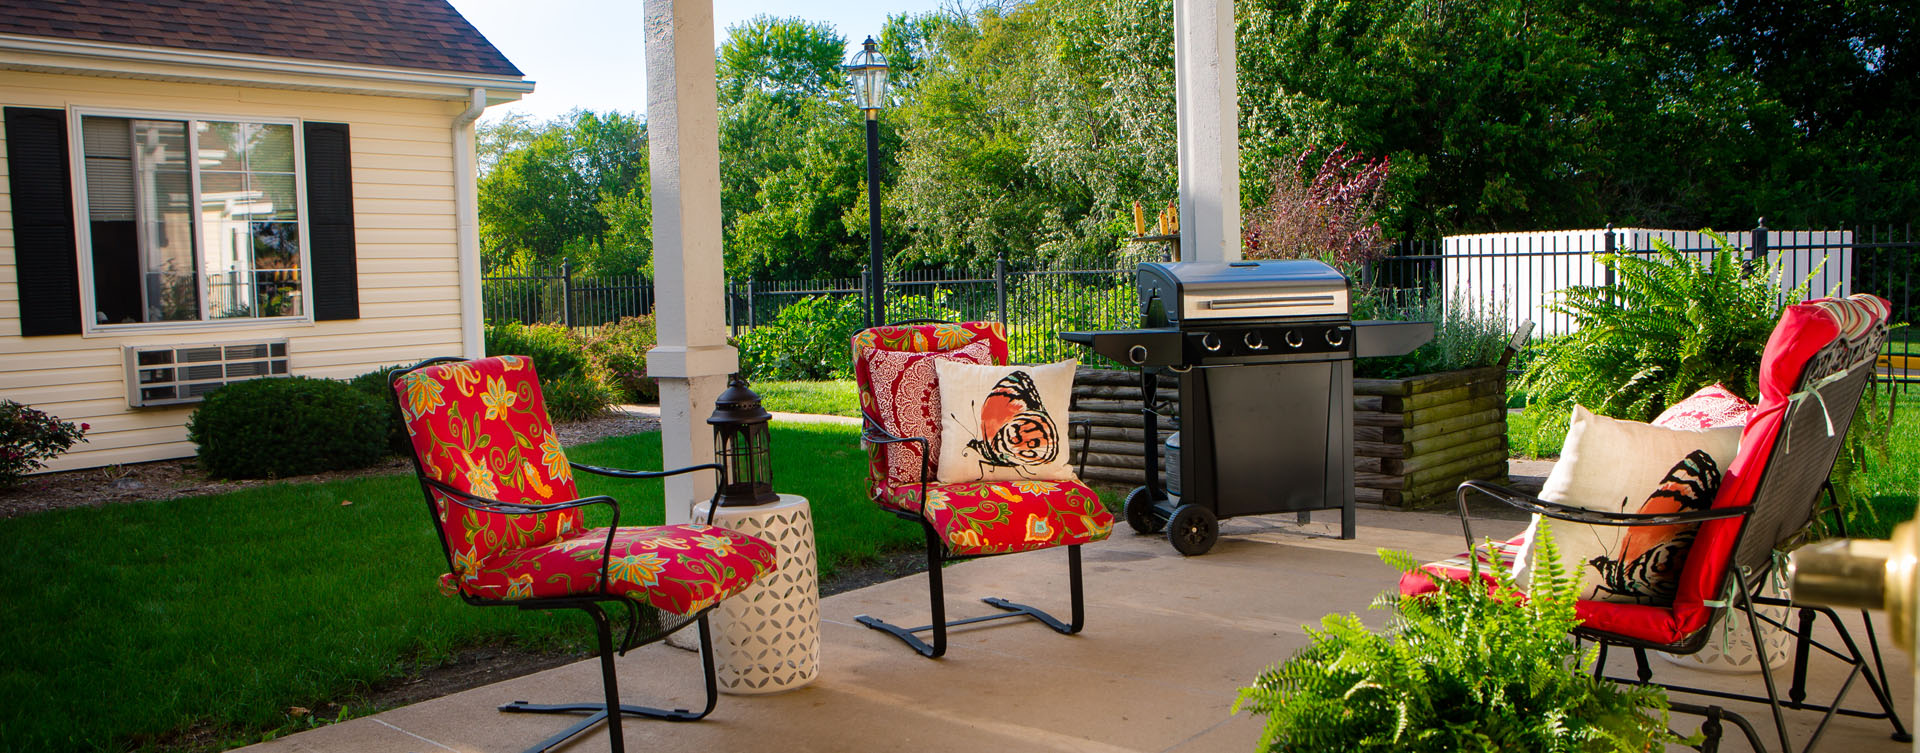 Enjoy the outdoors in a whole new light by stepping into our secure courtyard at Bickford of Macomb